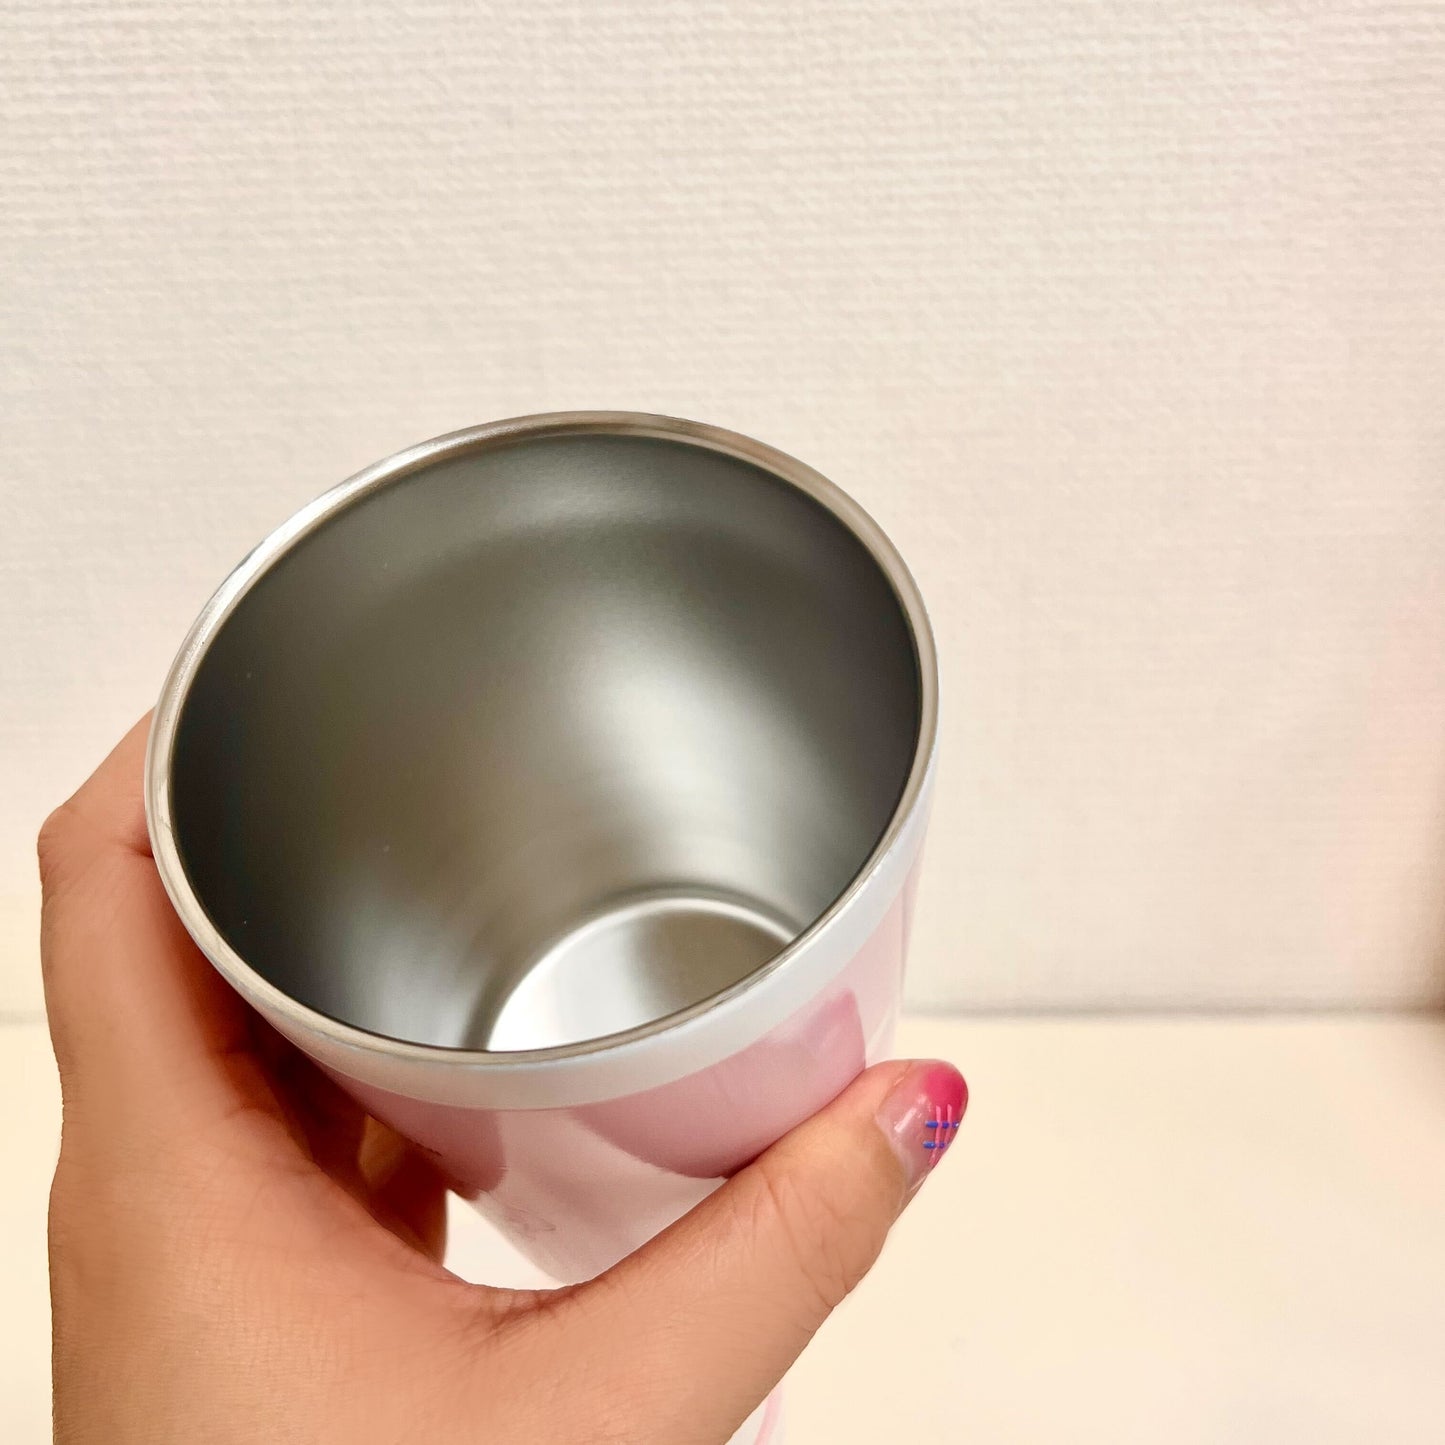 [Asamimi-chan] Stainless steel thermo tumbler (Asamimi-chan, popular scene Yoseatsume series) [Shipped in mid-February]